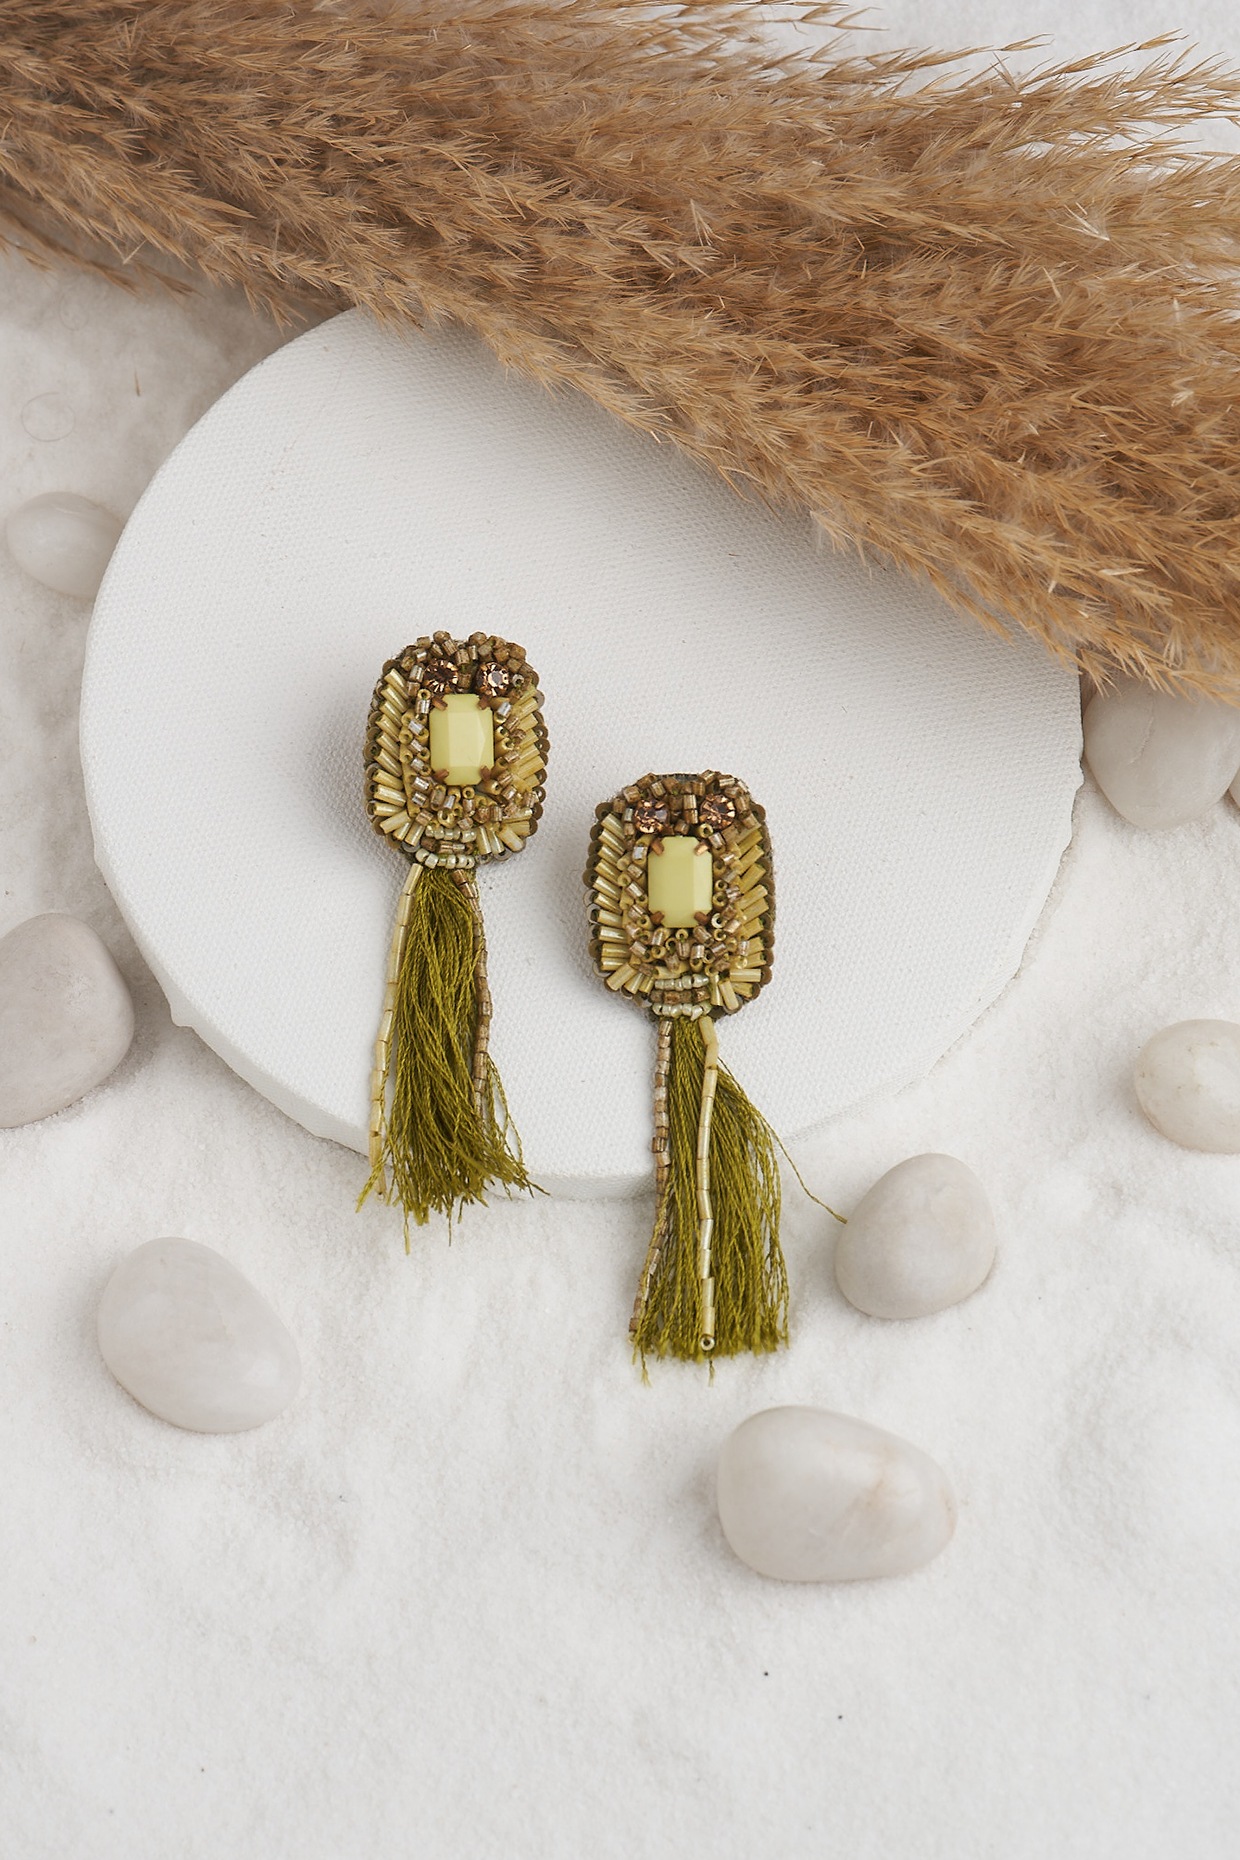 Buy Rose Gold and Olive Green Diamond-shape Earrings With Chain Tassel.  Dangling Beaded Earrings Olivine Crystal and Metal Tassel on Hook S-371  Online in India - Etsy